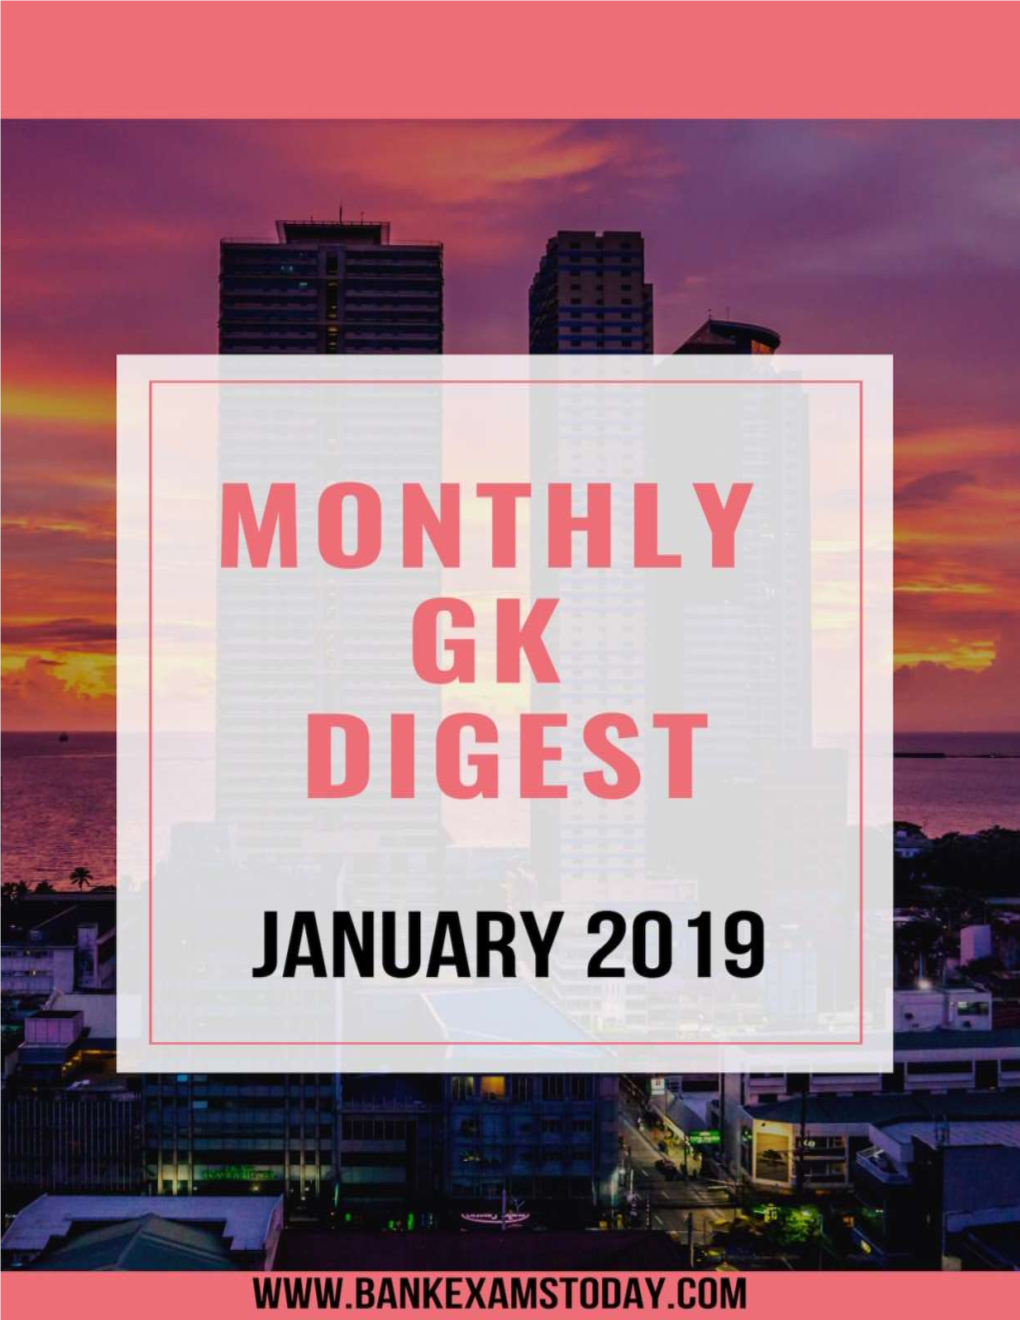 Monthly GK Digest: January 2019